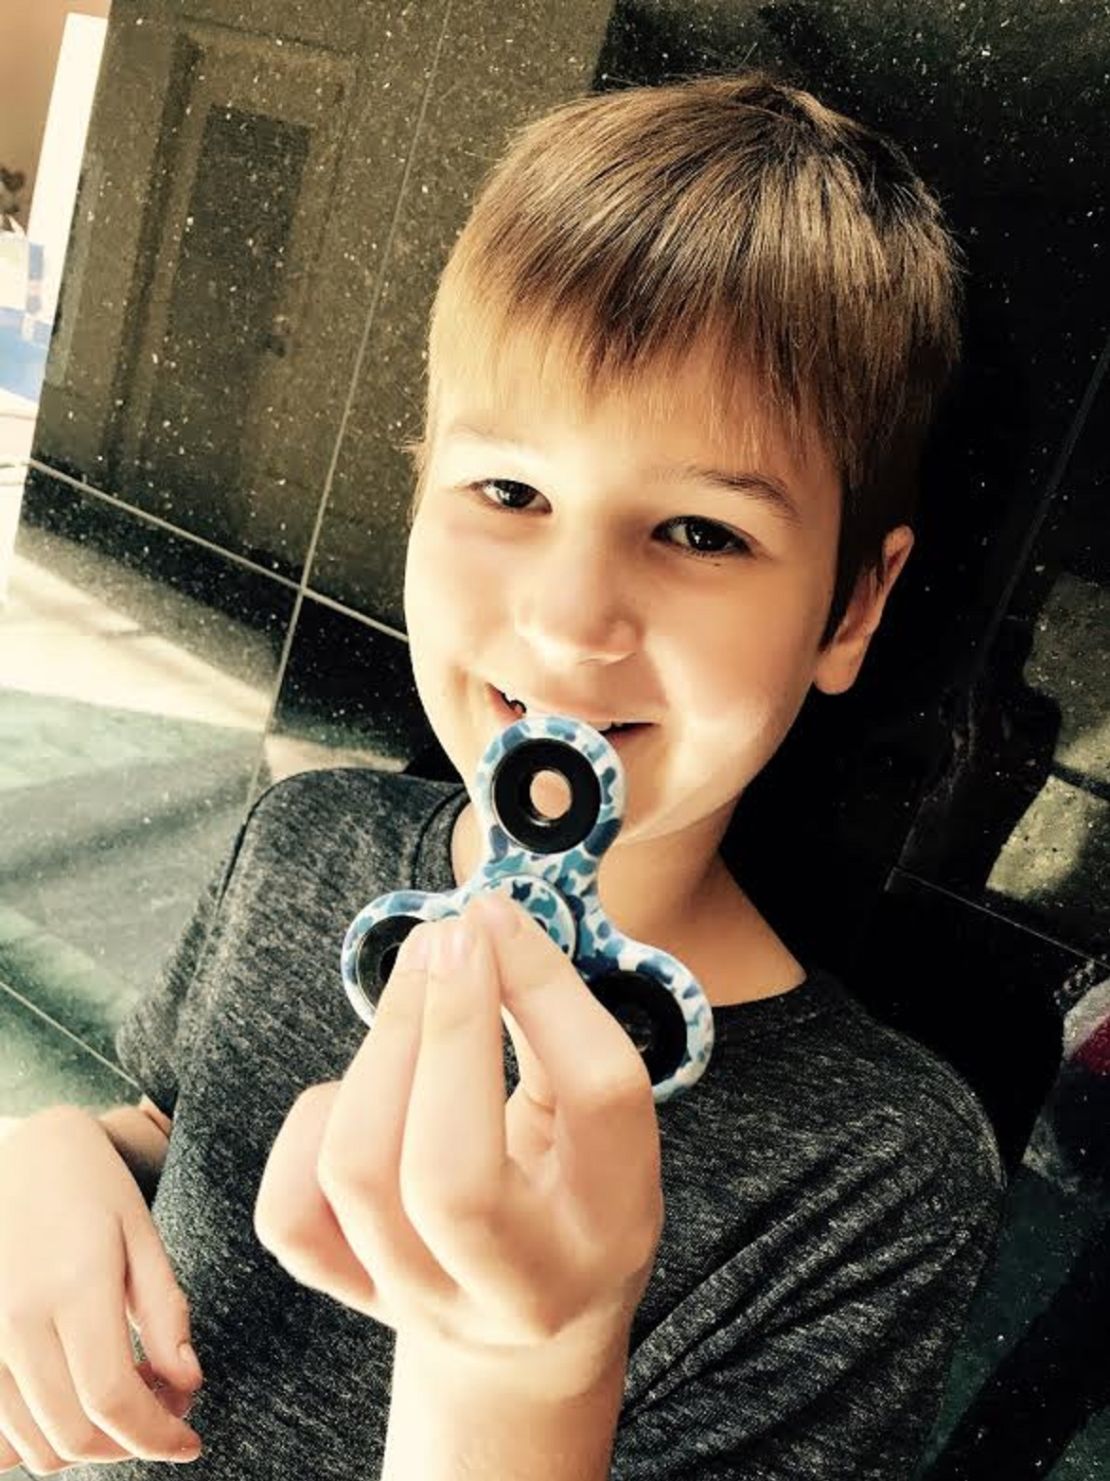 Alex Shivers shows off his camo-printed spinner. 